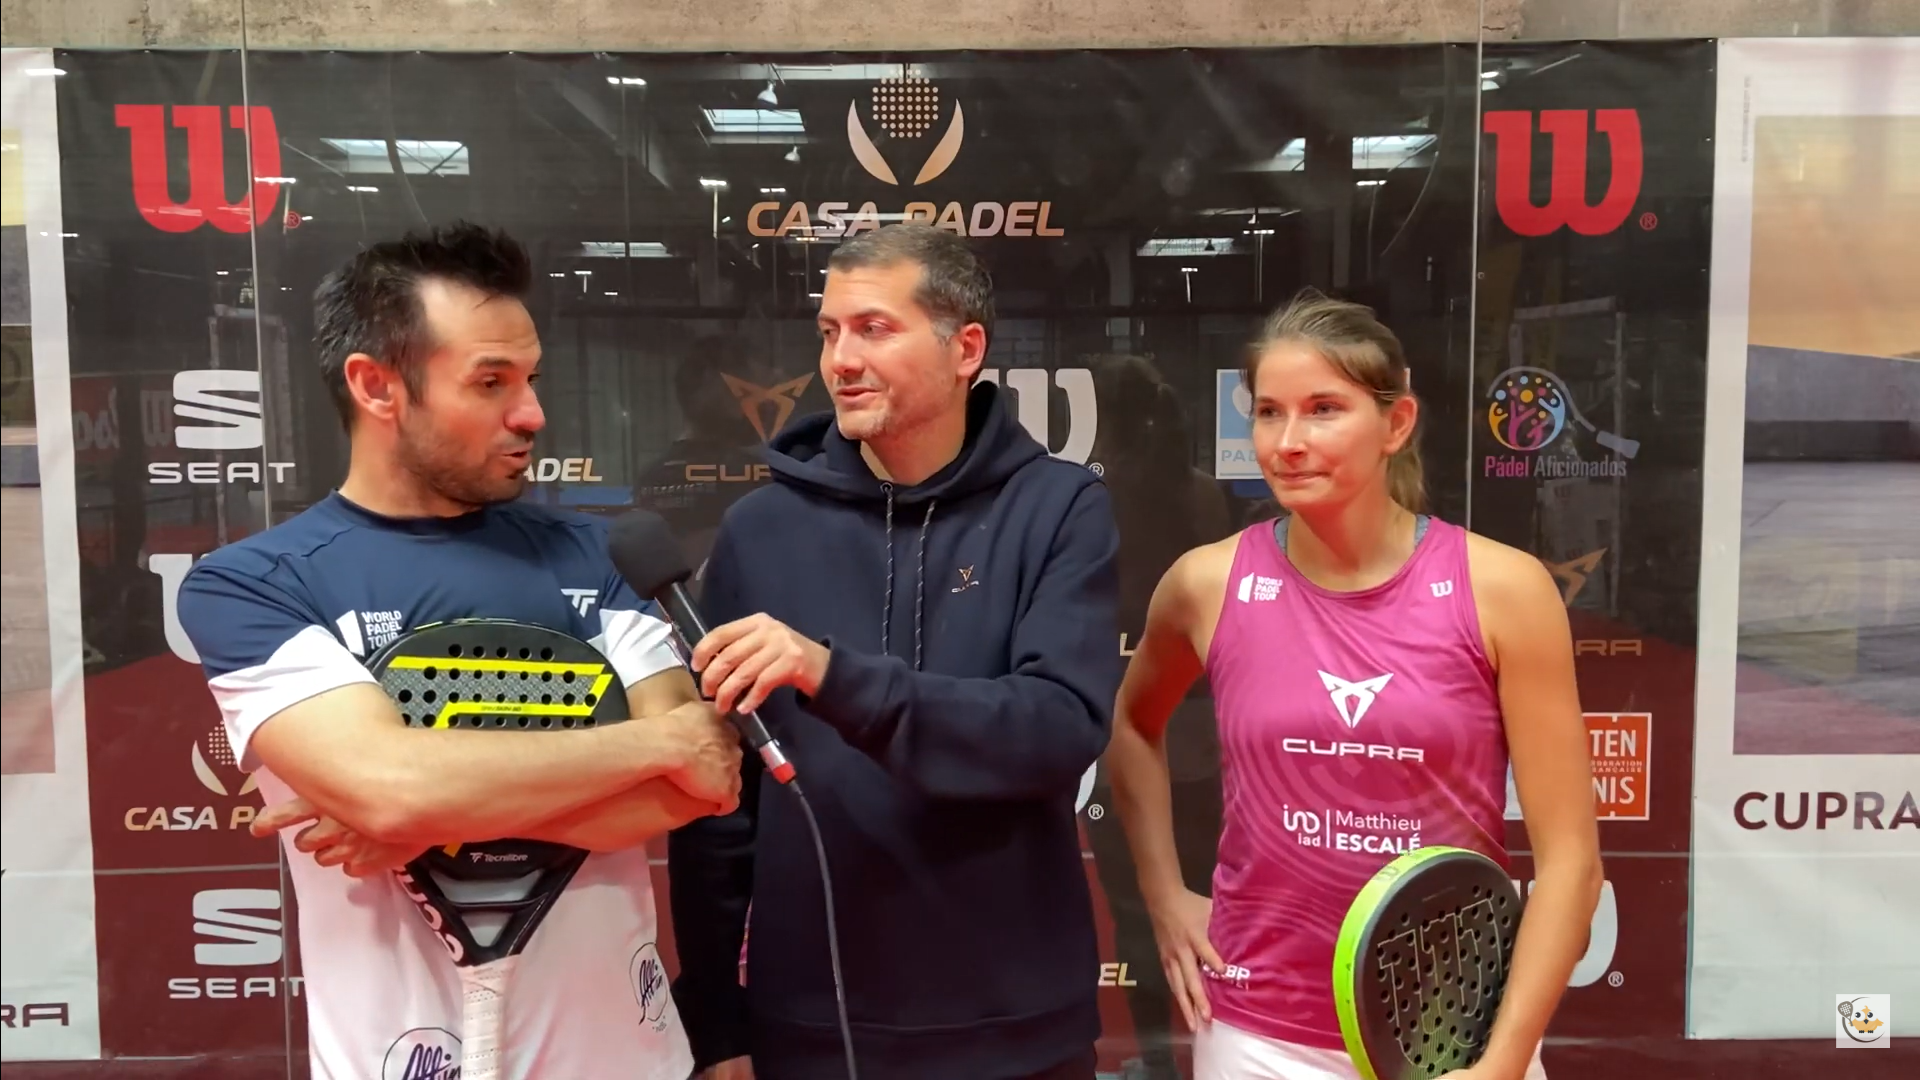 Tison/Collombon: “Casa Padel, an example for others!”